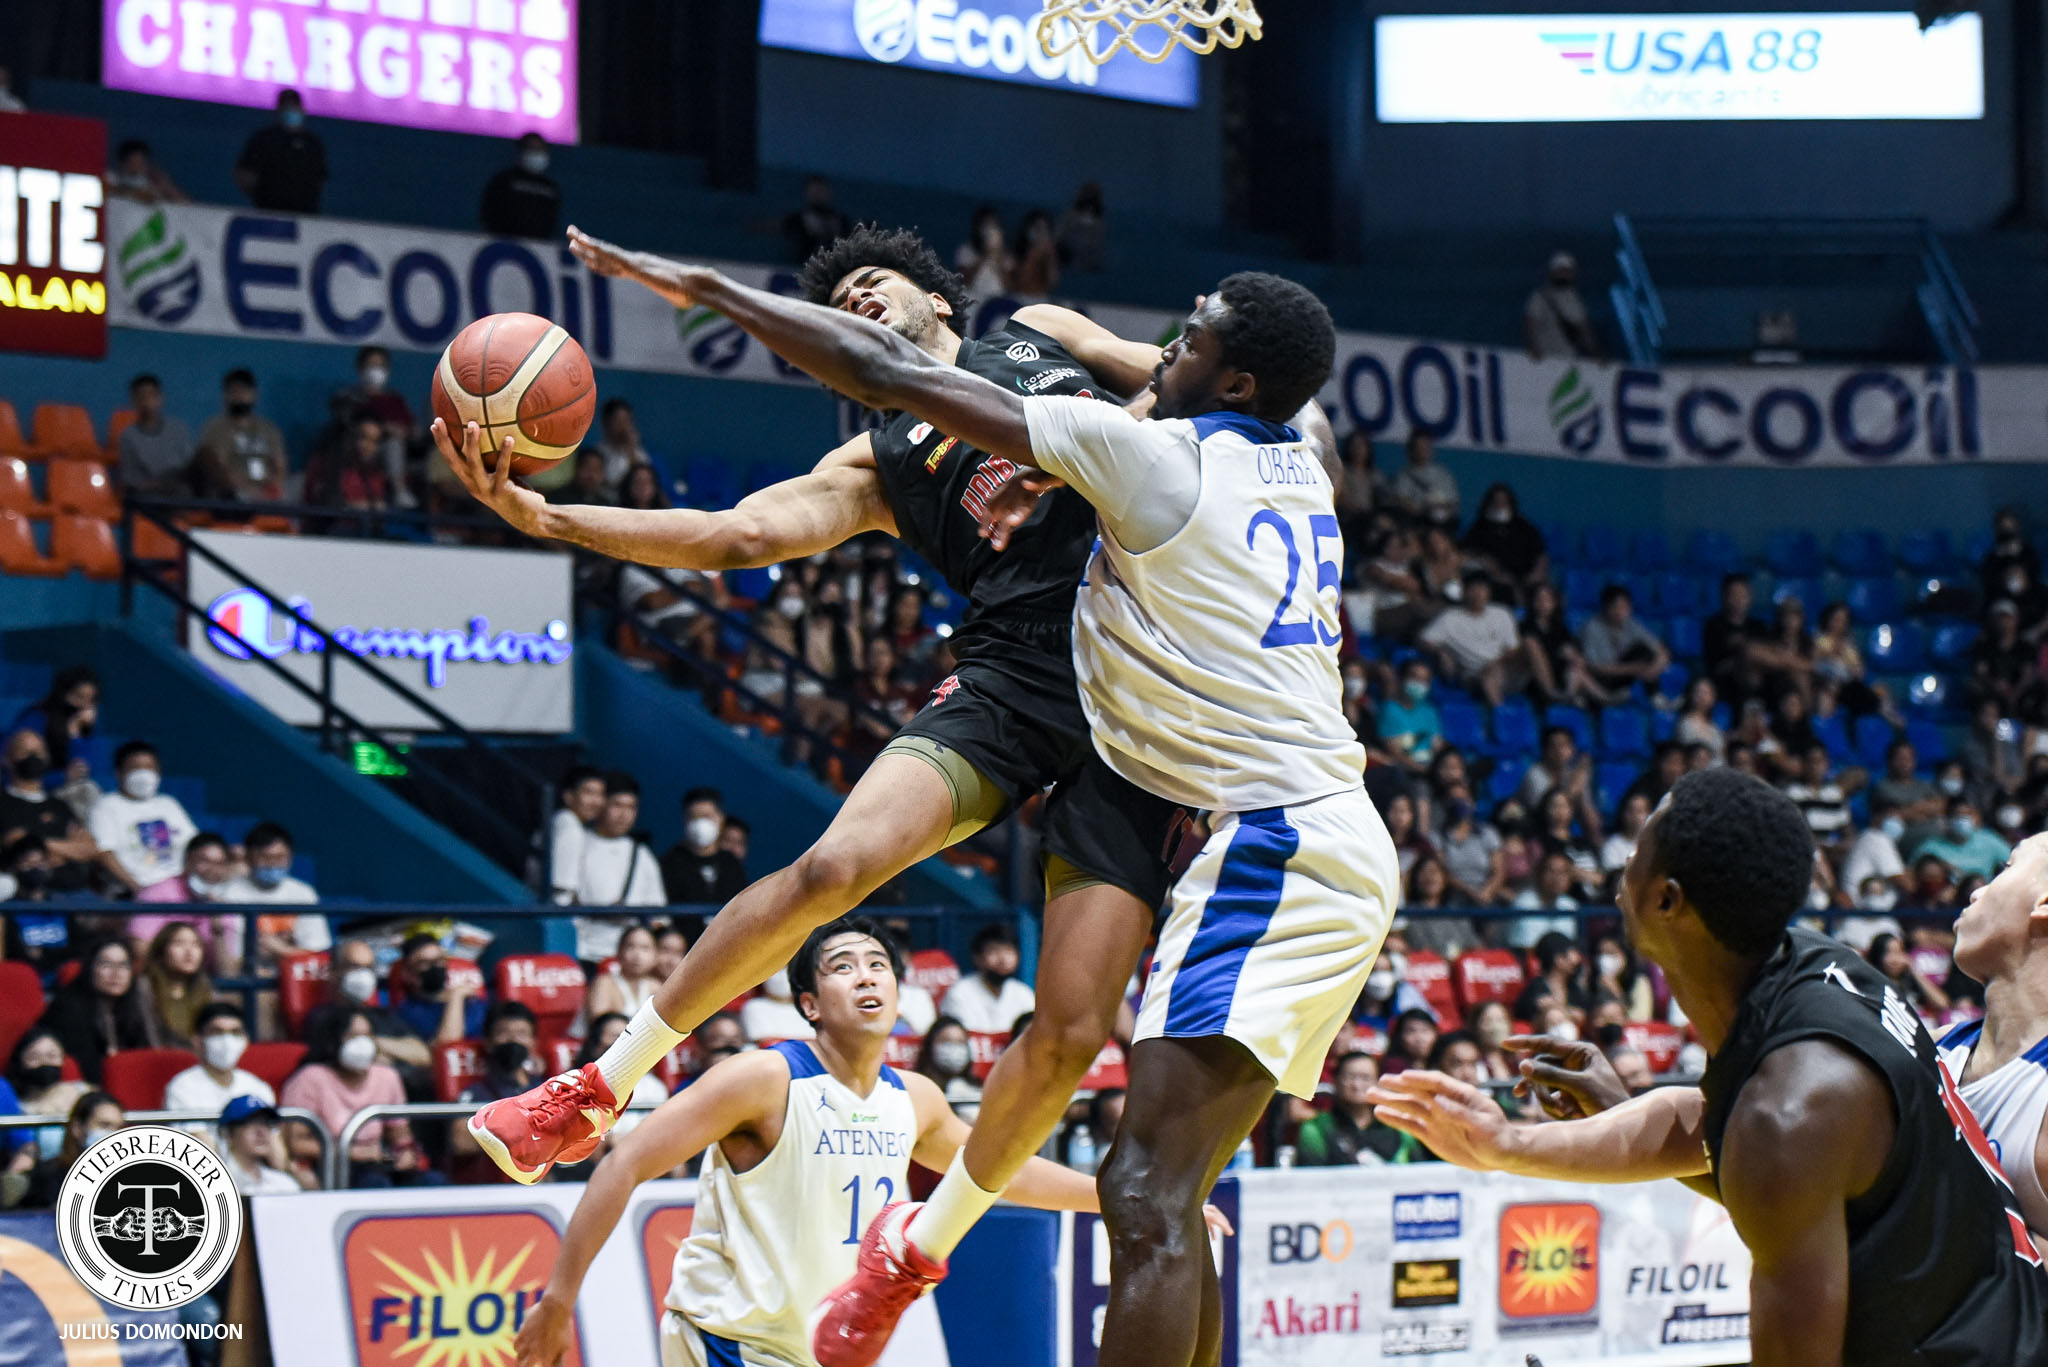 FFVC-LEBRON-LOPEZ-4212 Mason Amos can't wait to have more face-offs against good pal Francis Lopez ADMU Basketball News  - philippine sports news